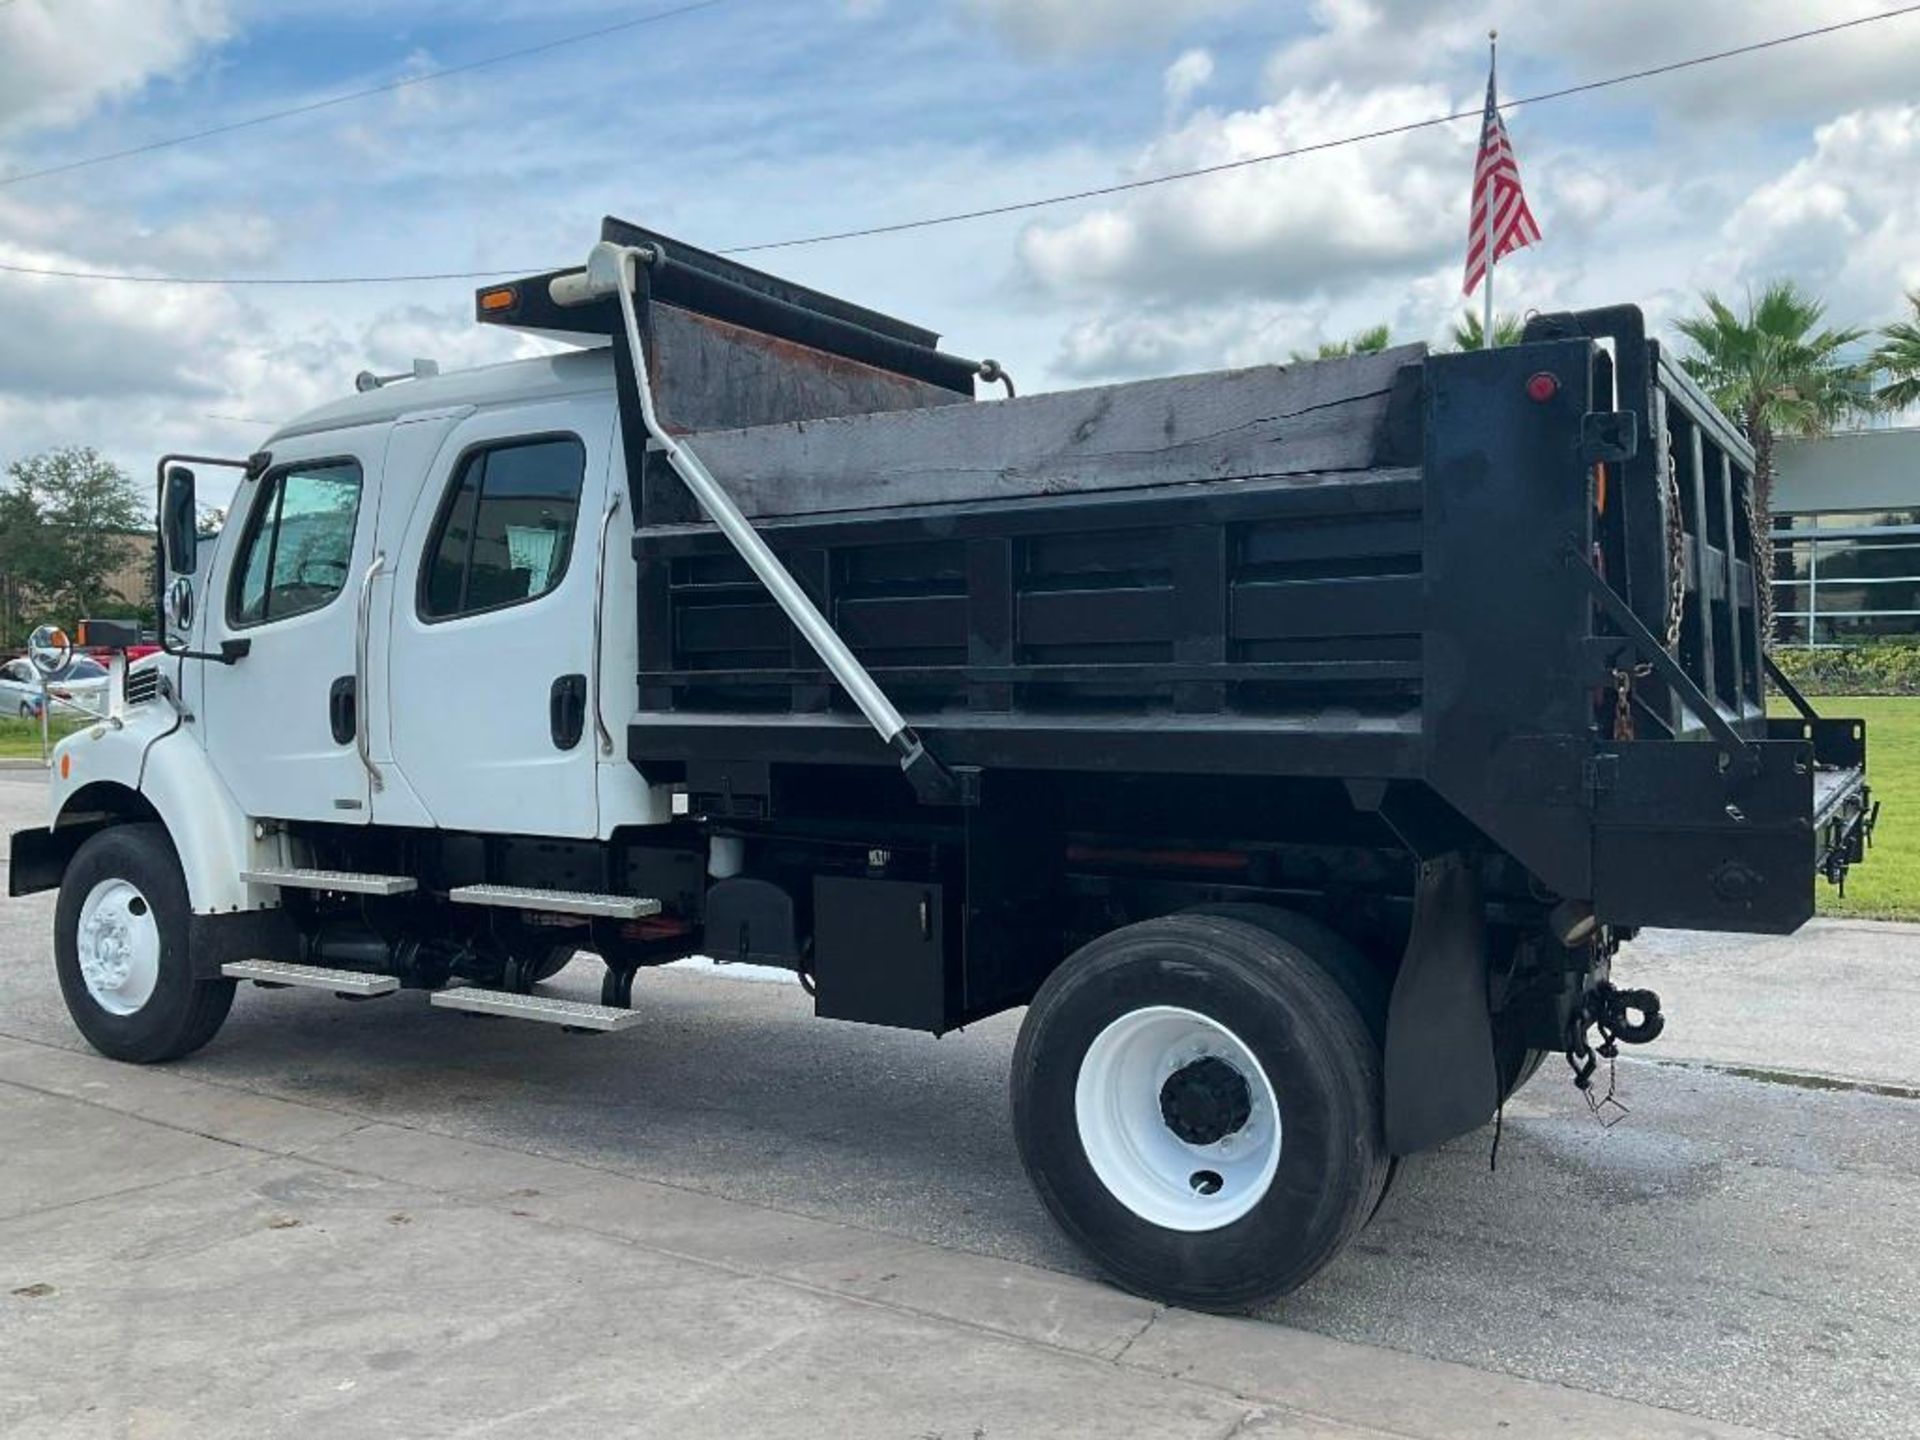 2010 FREIGHTLINER M2 106 BUSINESS CLASS DUMP TRUCK, DIESEL, AUTOMATIC, APPROX GVWR 16429, DOUBLE CAB - Image 6 of 37